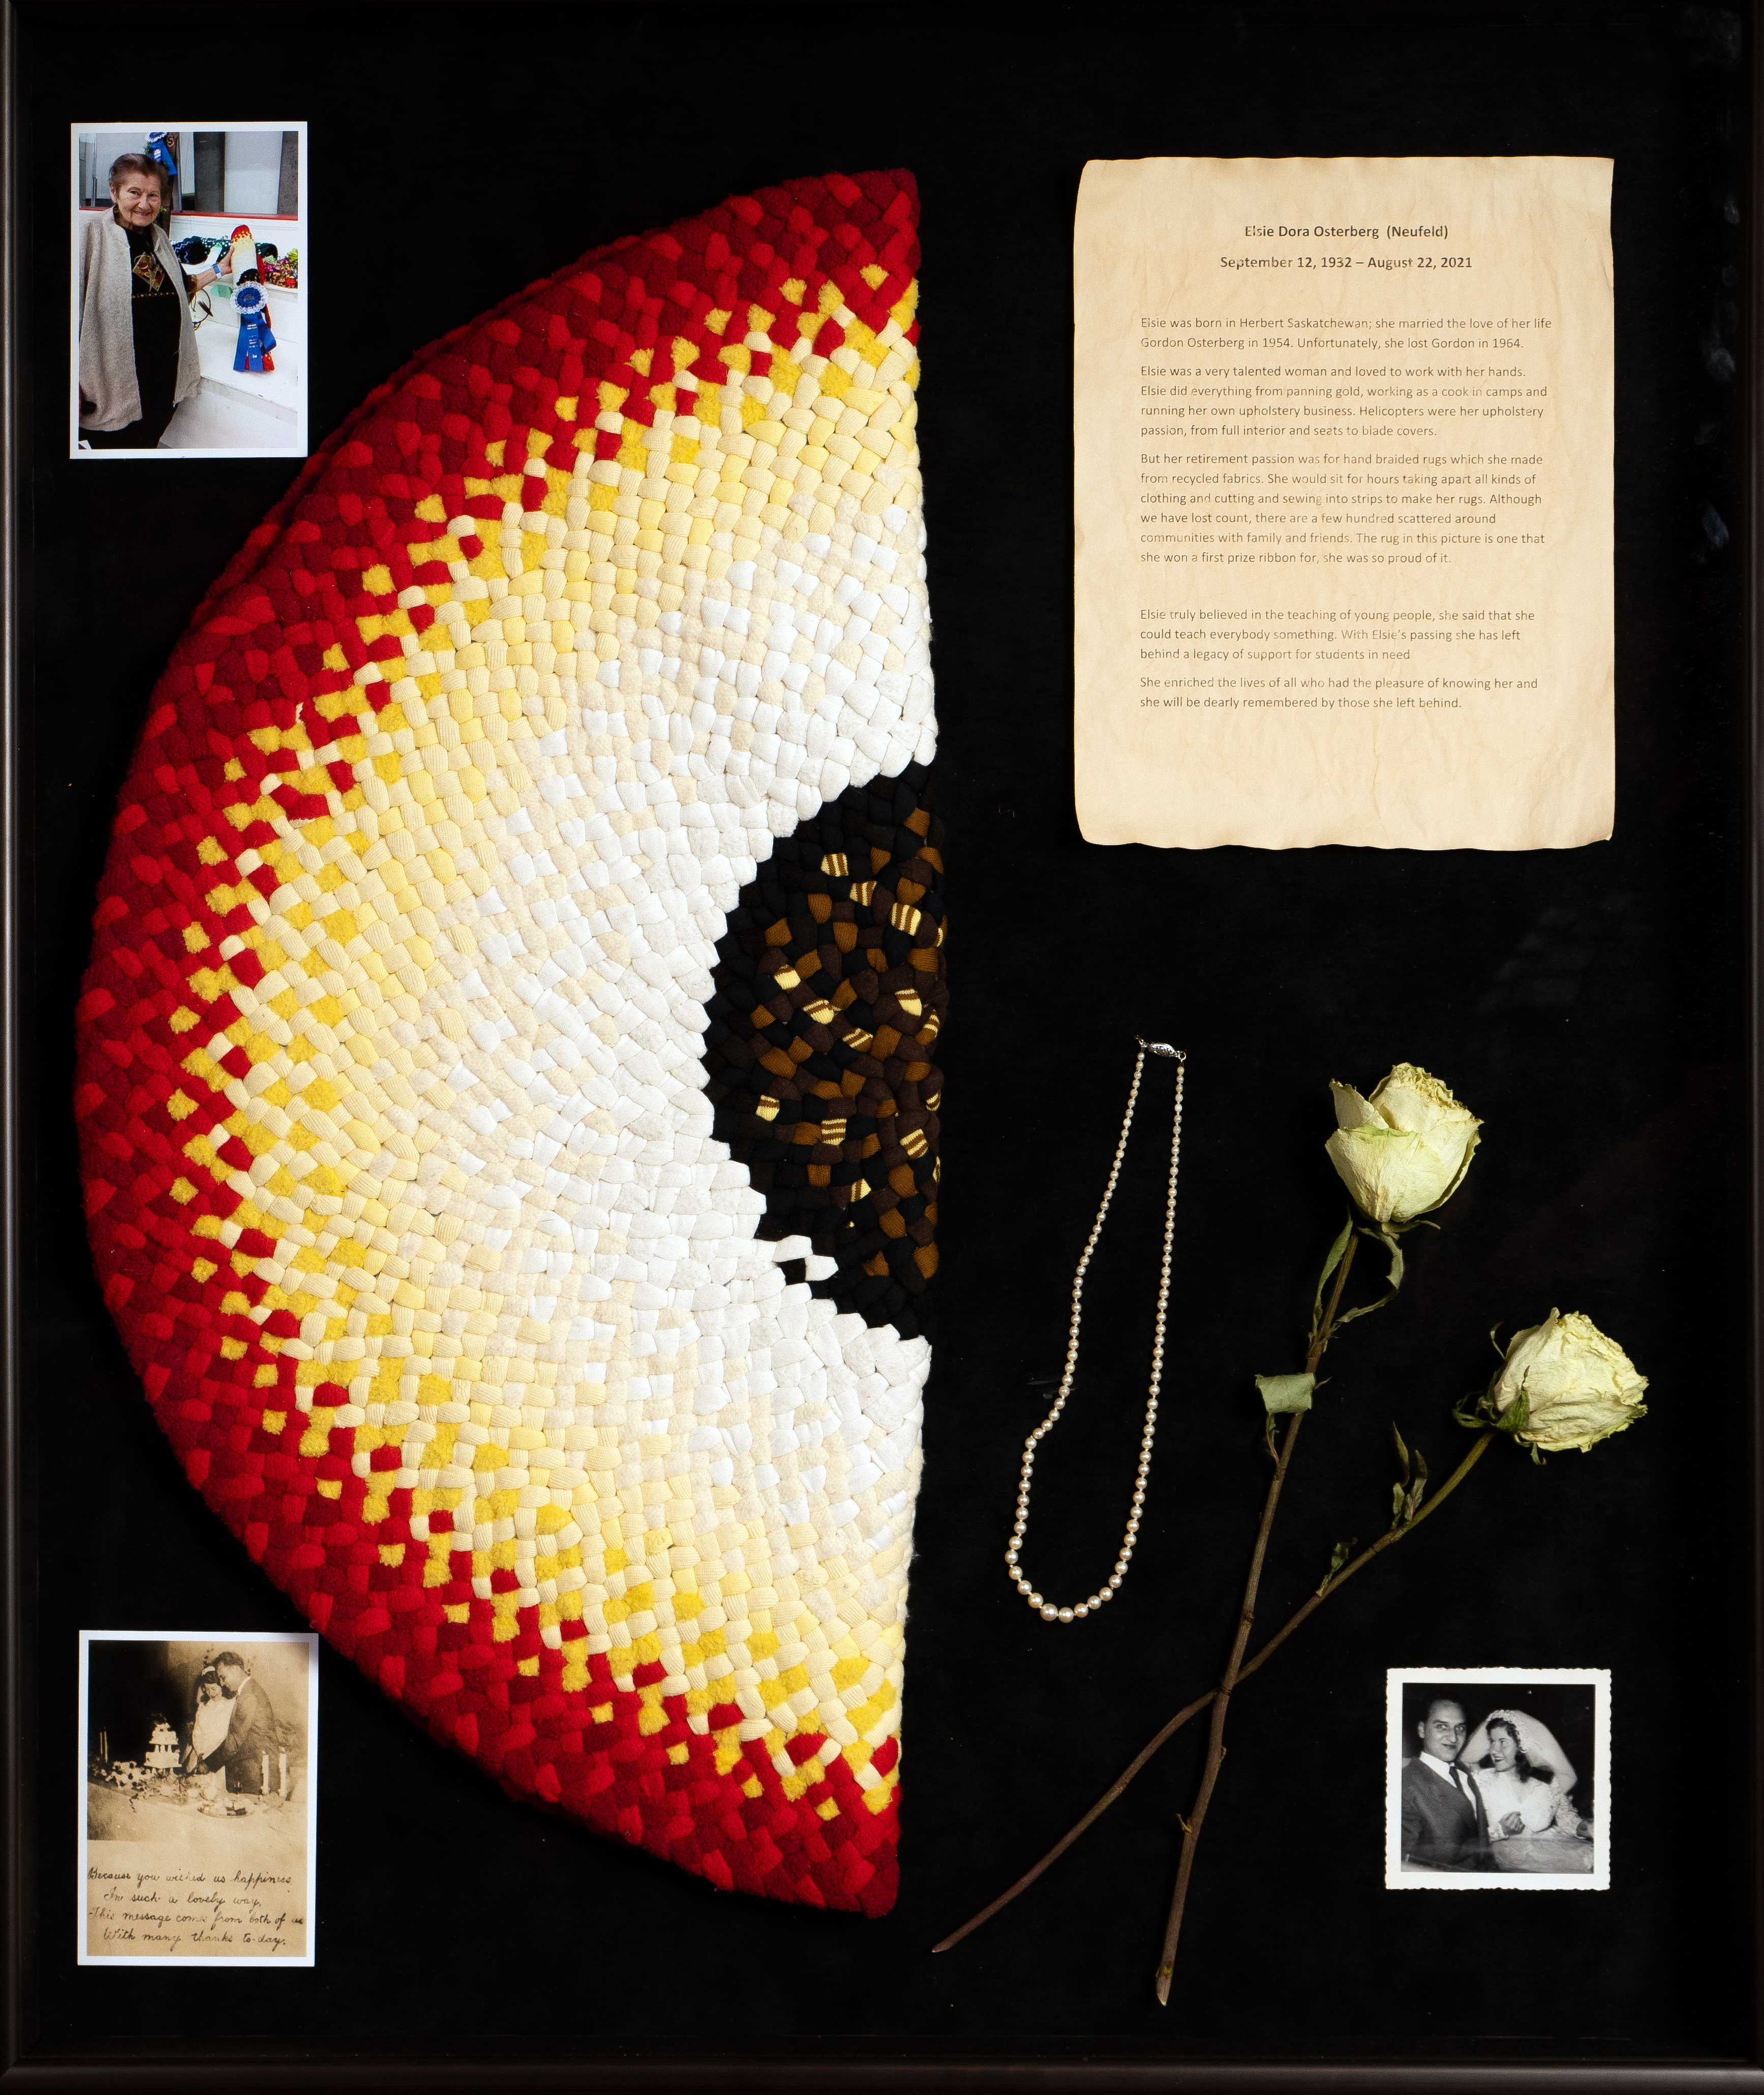 Elsie Osterberg Display: Hand-woven colourful rug, pearl necklac, white roses, photos throughout her life